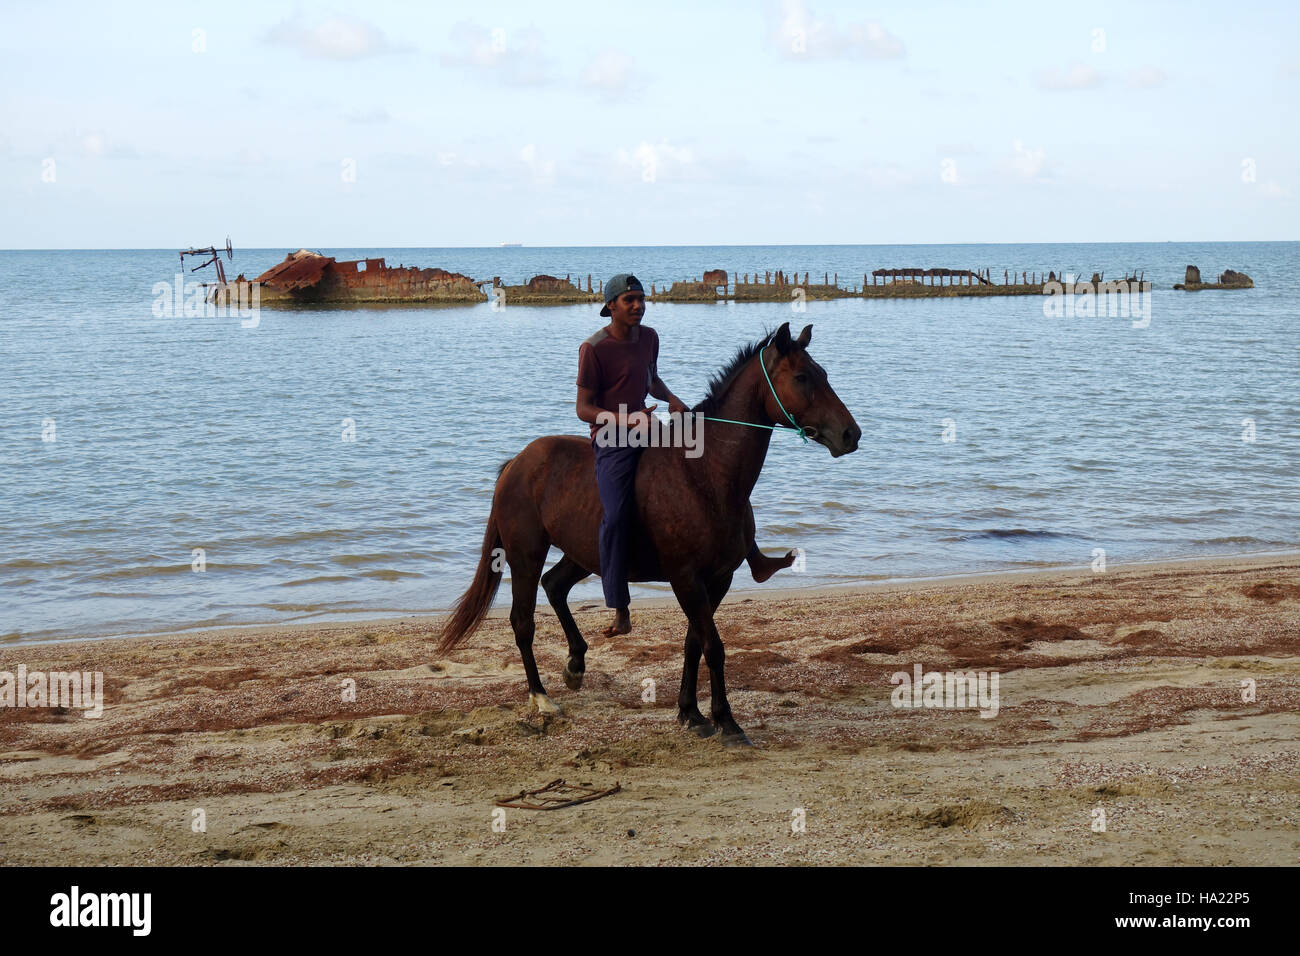 Young Aboriginal man breaking in horse by riding bareback with rope reins along beach, Yarrabah, near Cairns, Queensland, Australia. No MR Stock Photo